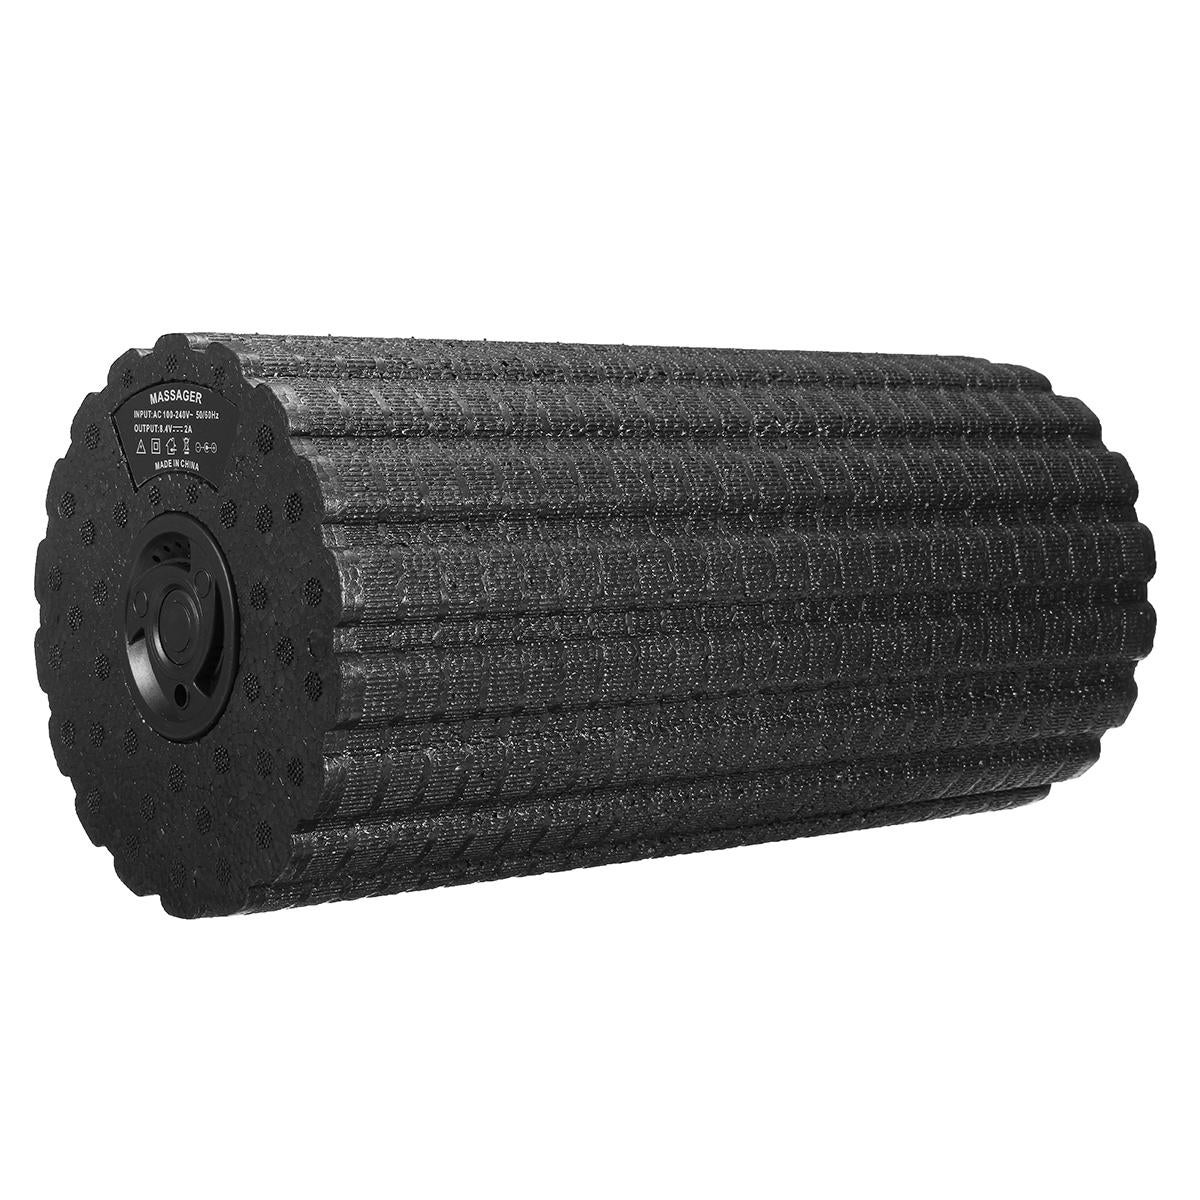 Vibrating Foam Roller Massage Yoga Gym Four-speed Adjustable Solid Bubble